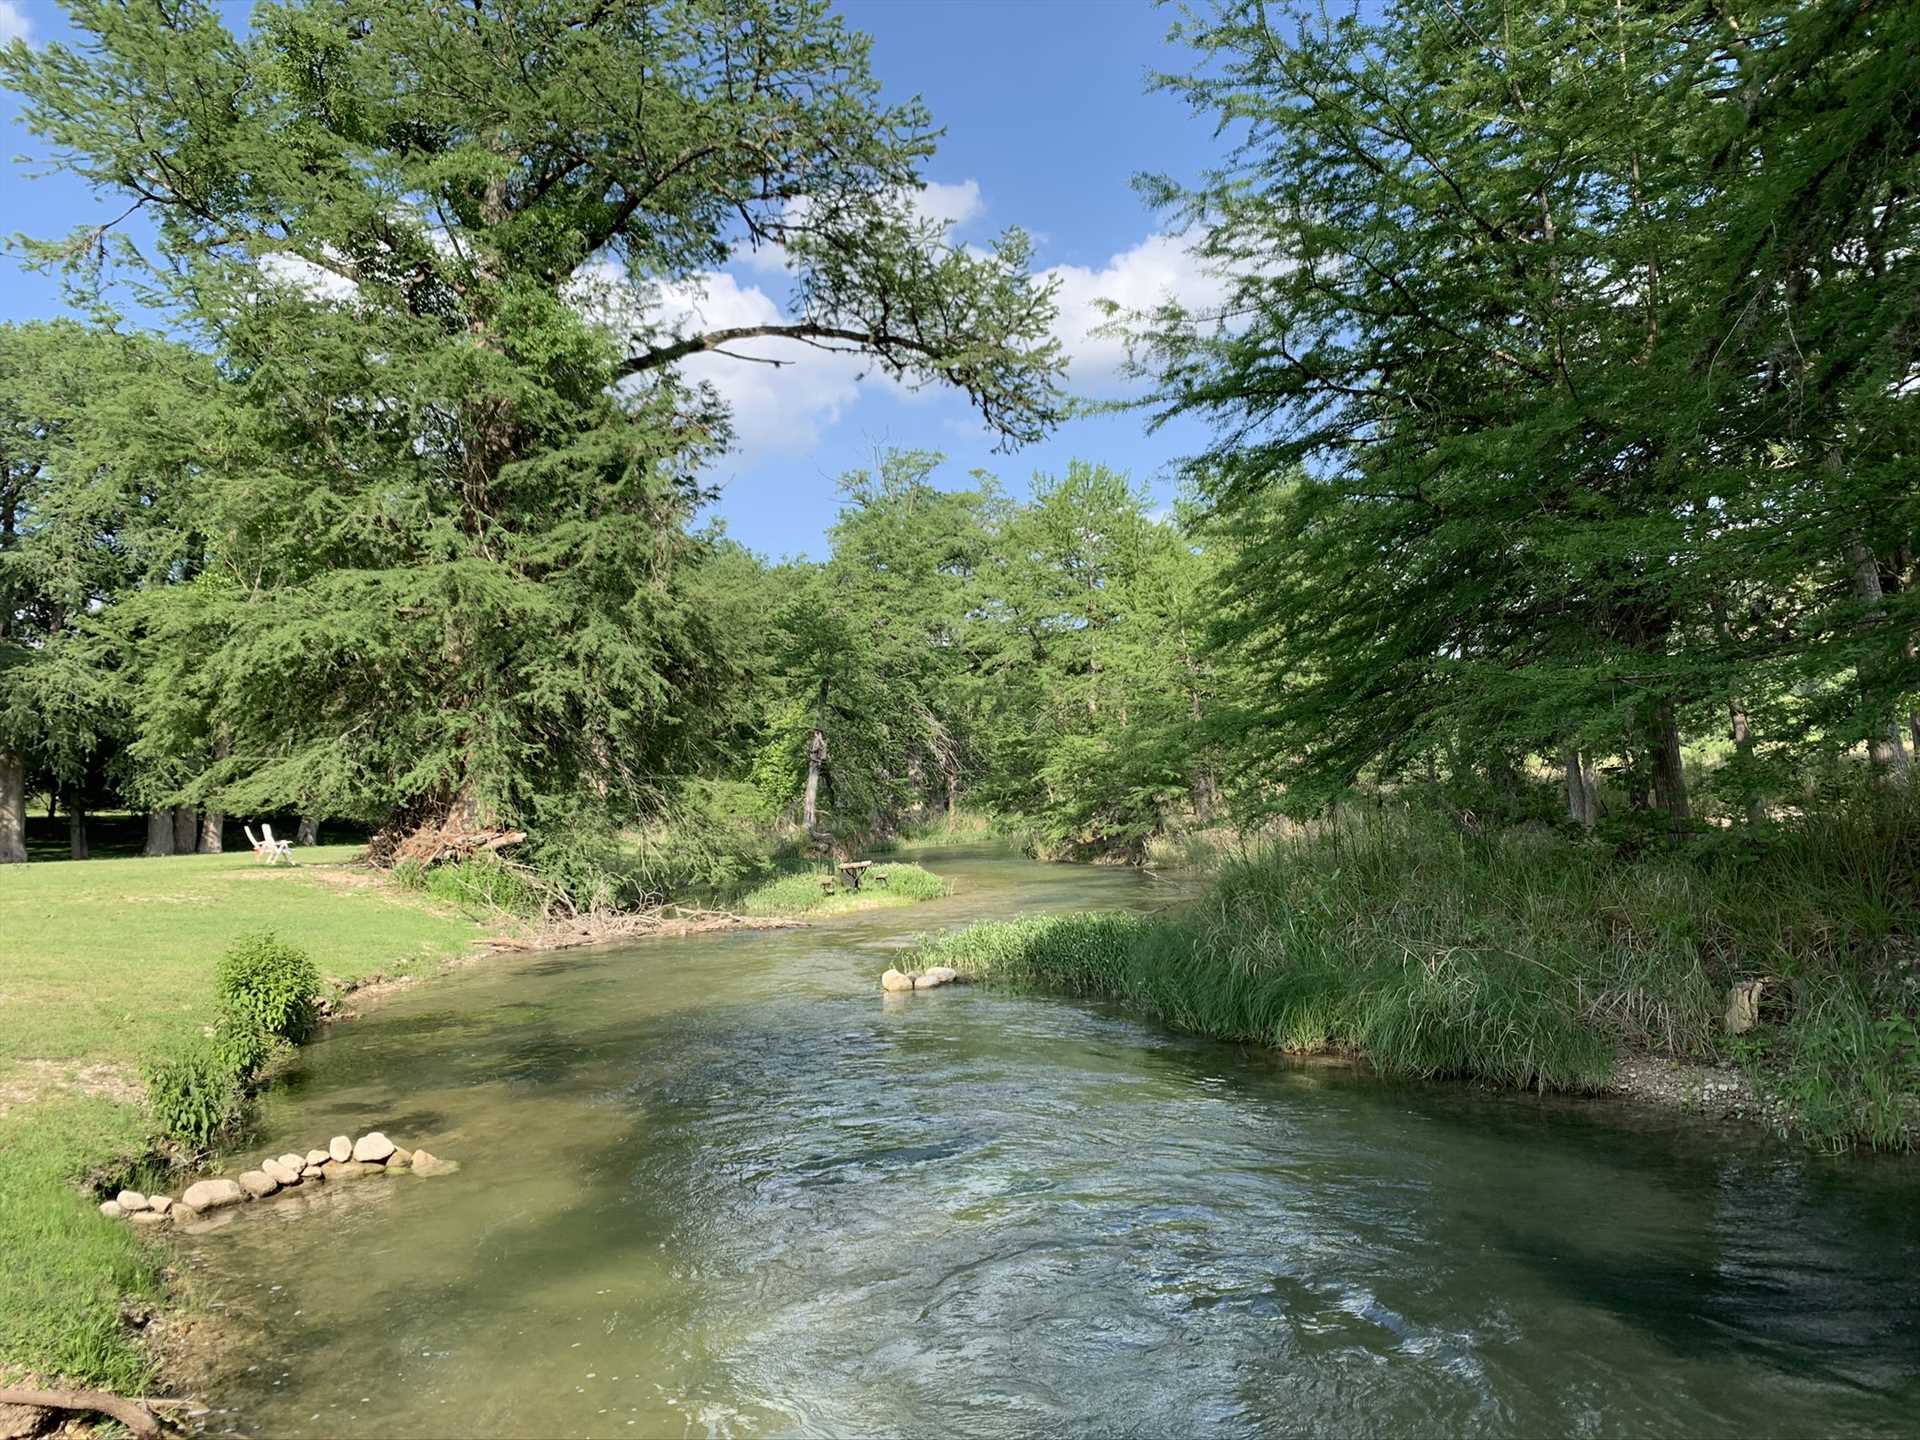                                                 Tubing, swimming, and fishing are all available to you here, with access to the Guadalupe River close by!